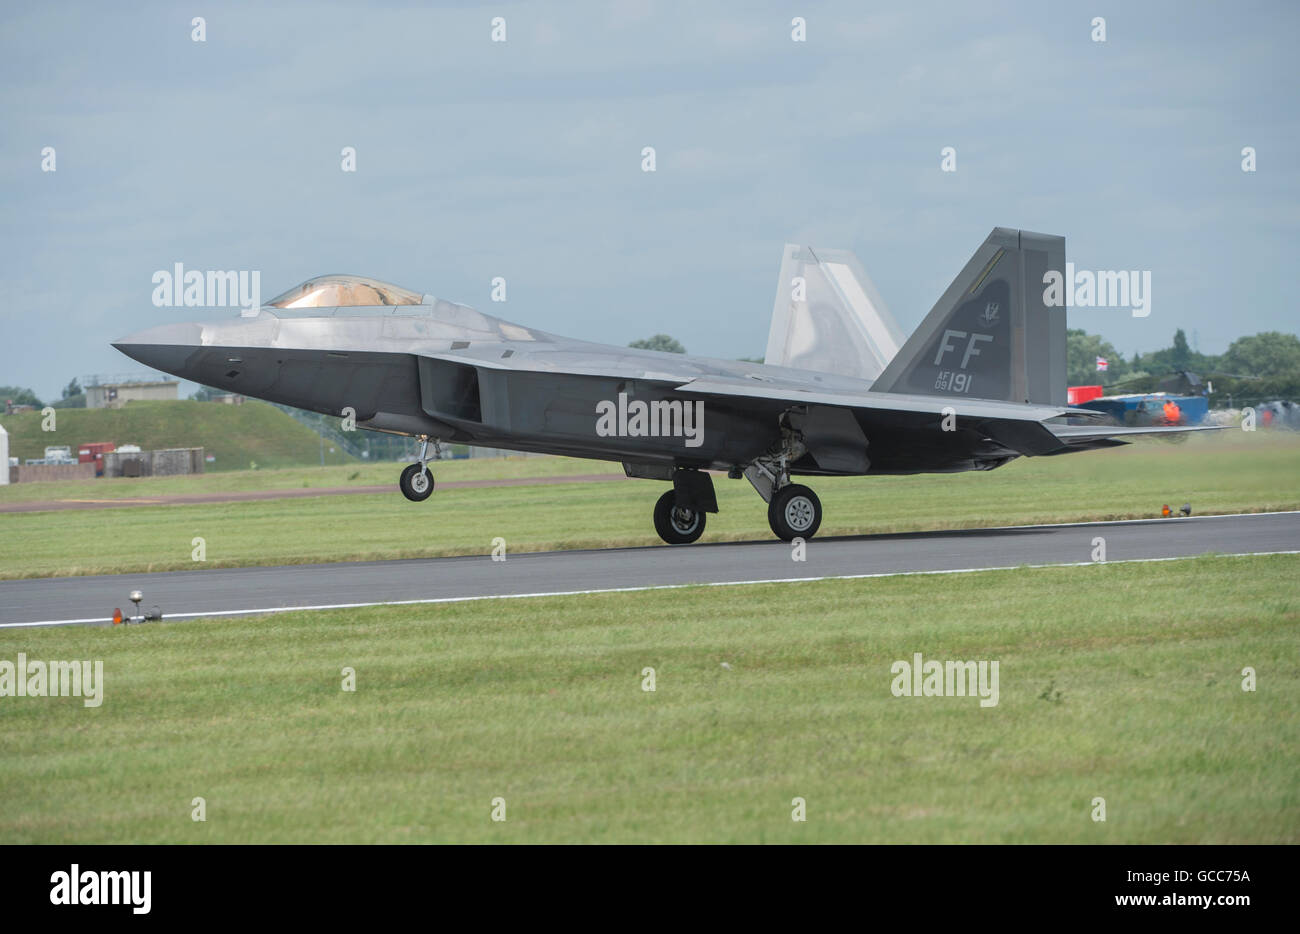 RAF Fairford, Gloucestershire. 8th July, 2016. Day 1 of the Royal International Air Tattoo (RIAT) with an impressive demo from the Lockheed Martin F-22A Raptor fifth generation stealth fighter. Credit:  aviationimages/Alamy Live News. Stock Photo